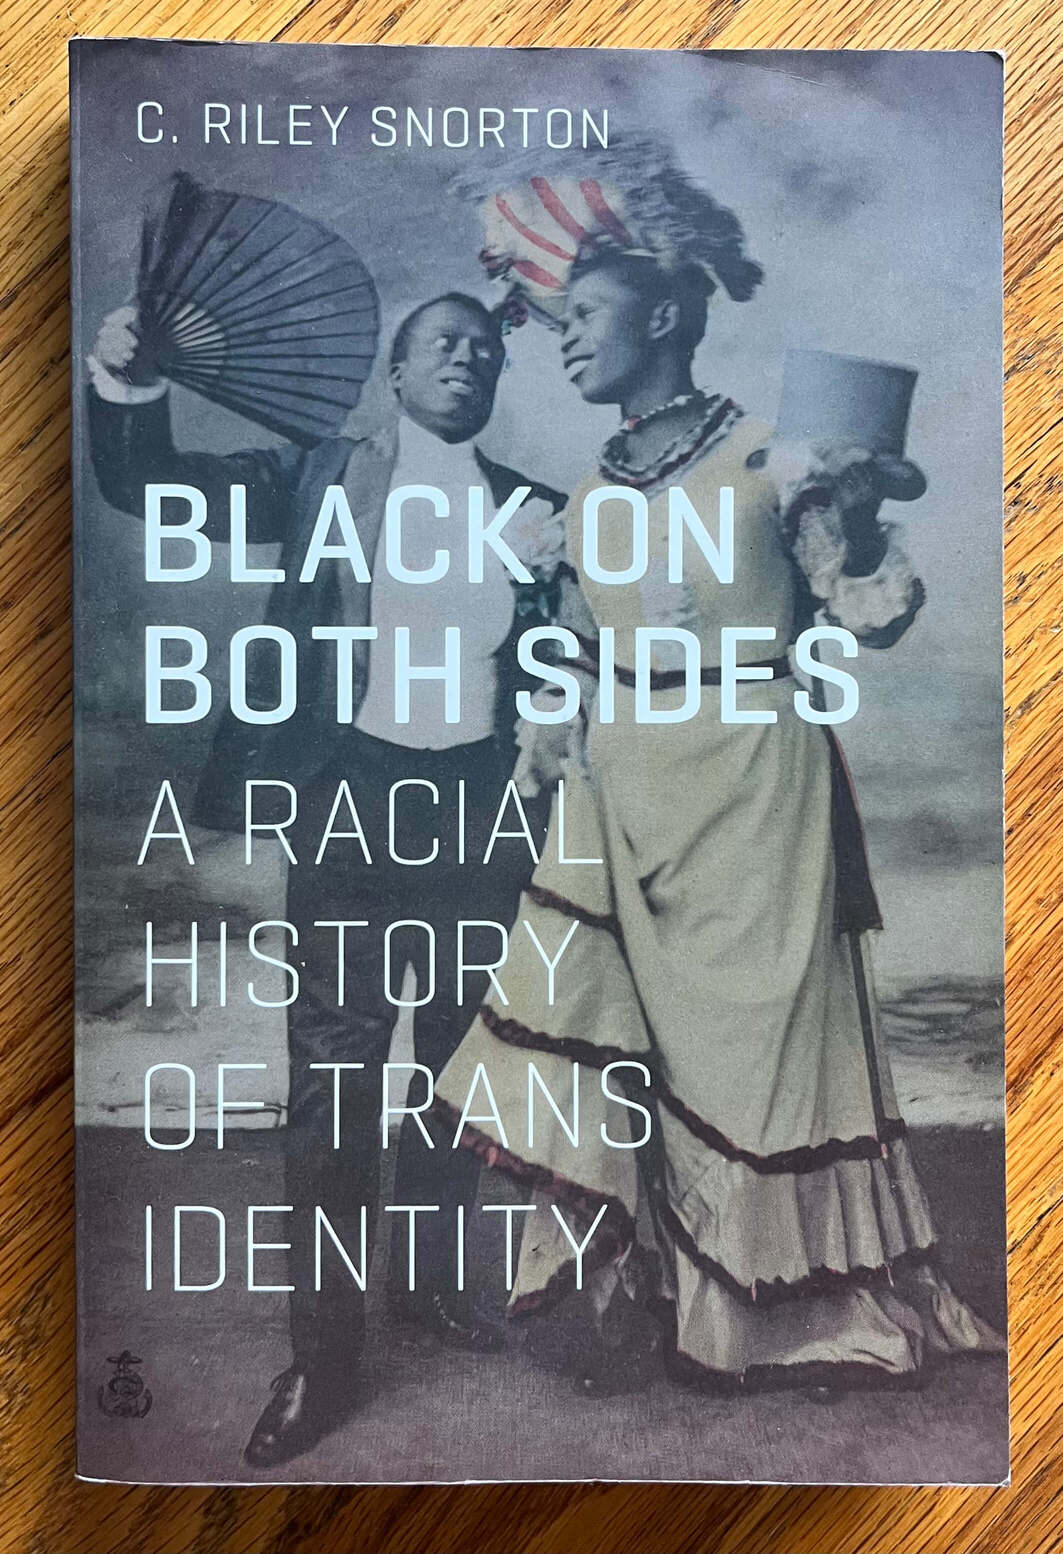 “Black on Both Sides: A Racial History of Trans Identity” by C. Riley Snorton